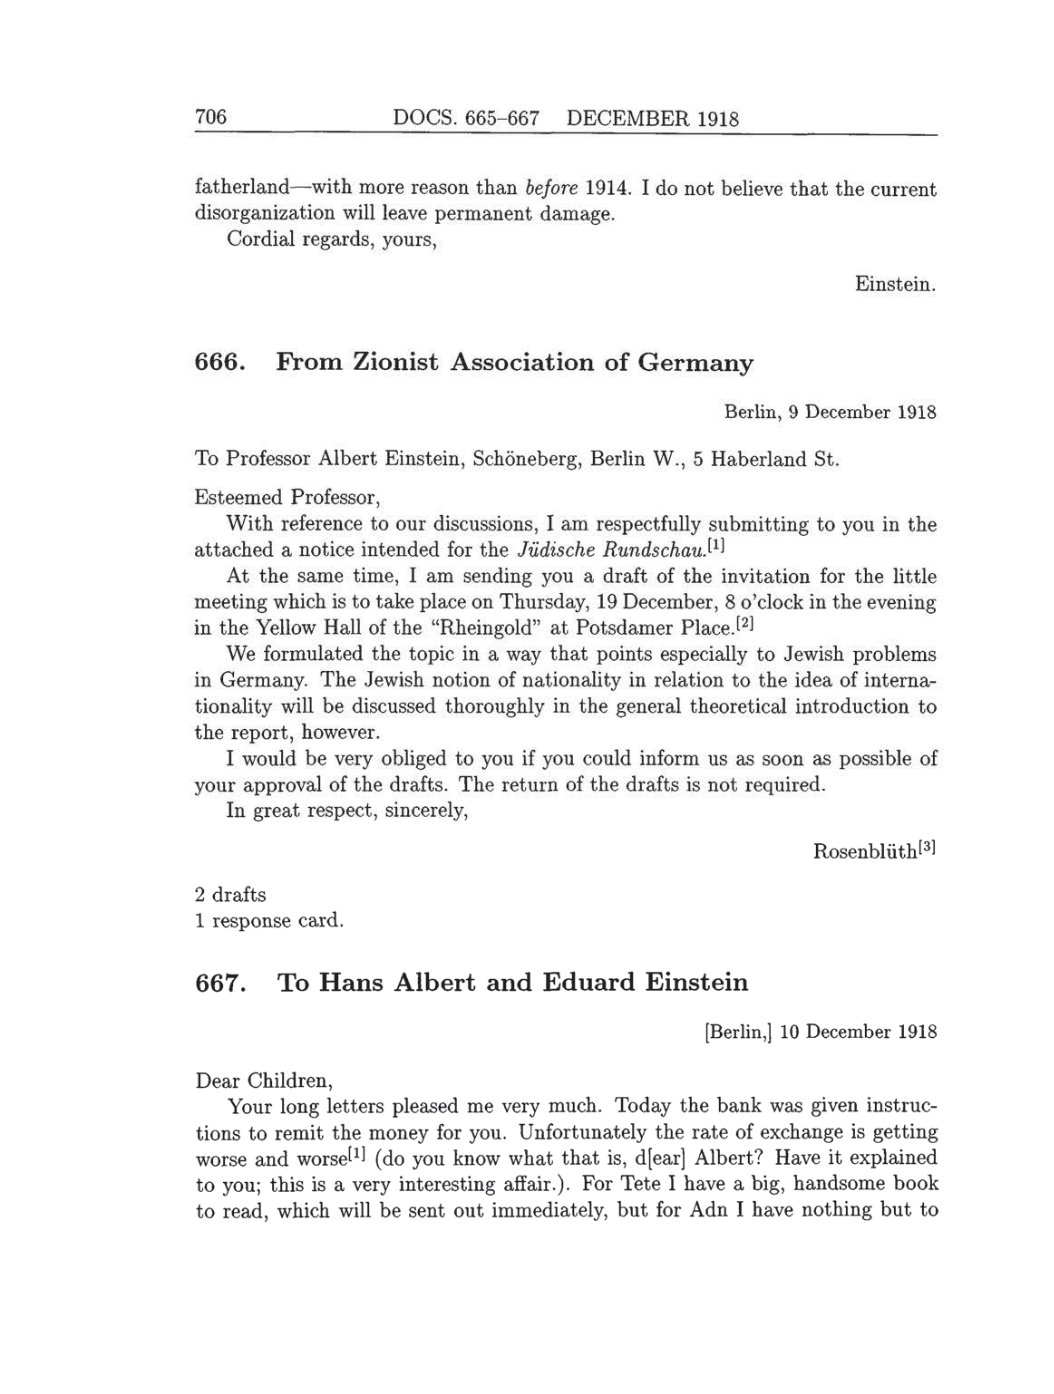 Volume 8: The Berlin Years: Correspondence, 1914-1918 (English translation supplement) page 706